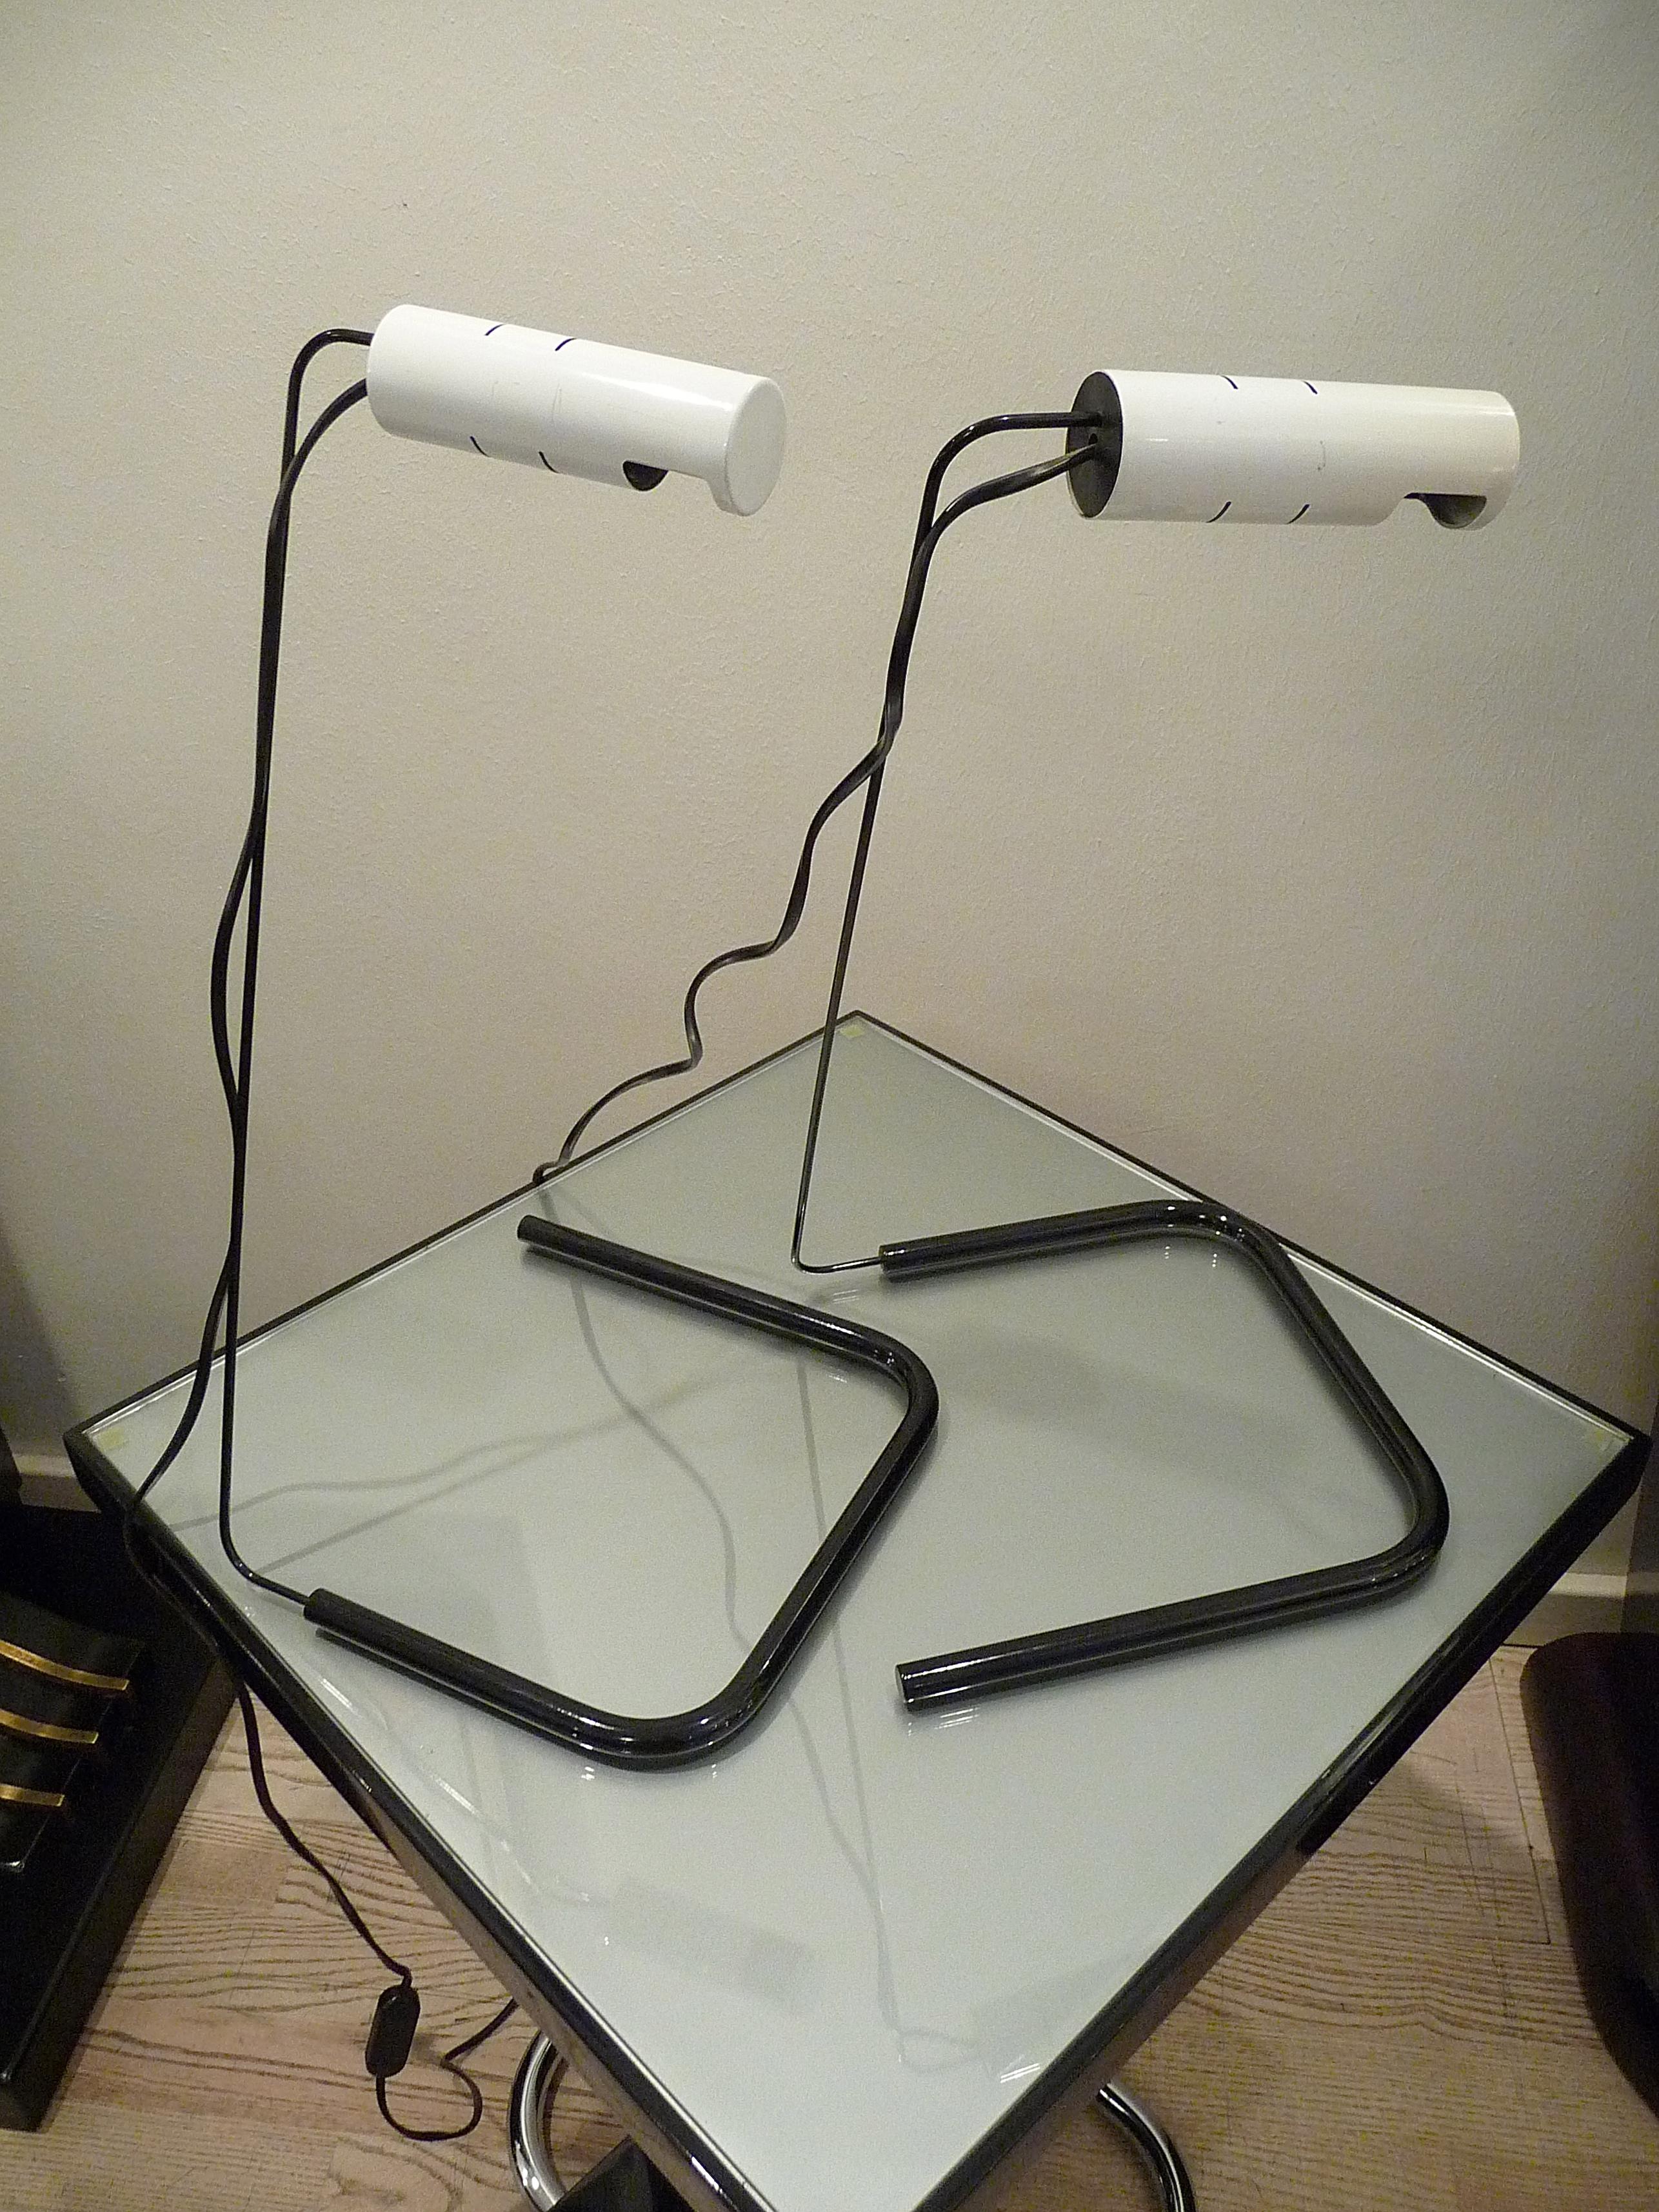 Rare desk lamp SLALOM, designed by Vico Magistretti, manufactured by O-Luce, Italy, 1981. An djustable lamp, the shade is rotatable and adjustable in several different positions using the black plastic handle. Two items available, one still wears